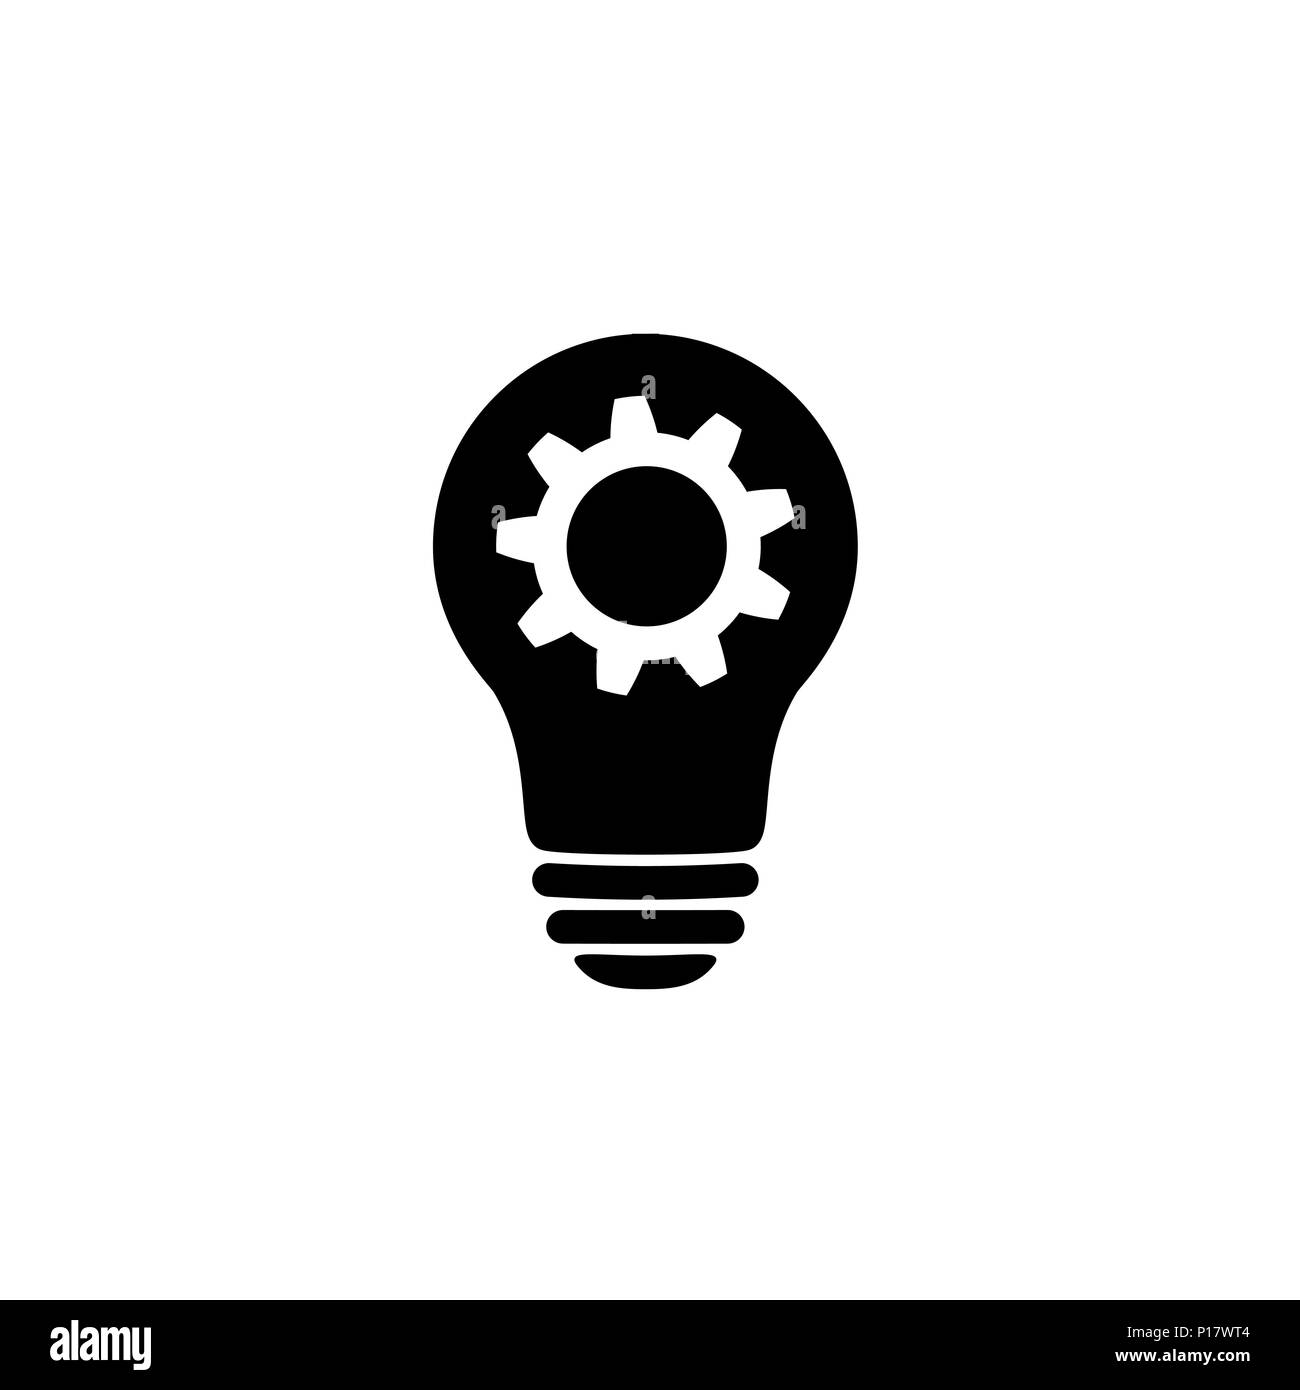 Lamp bulb with gear icon. Woking idea symbol Stock Vector